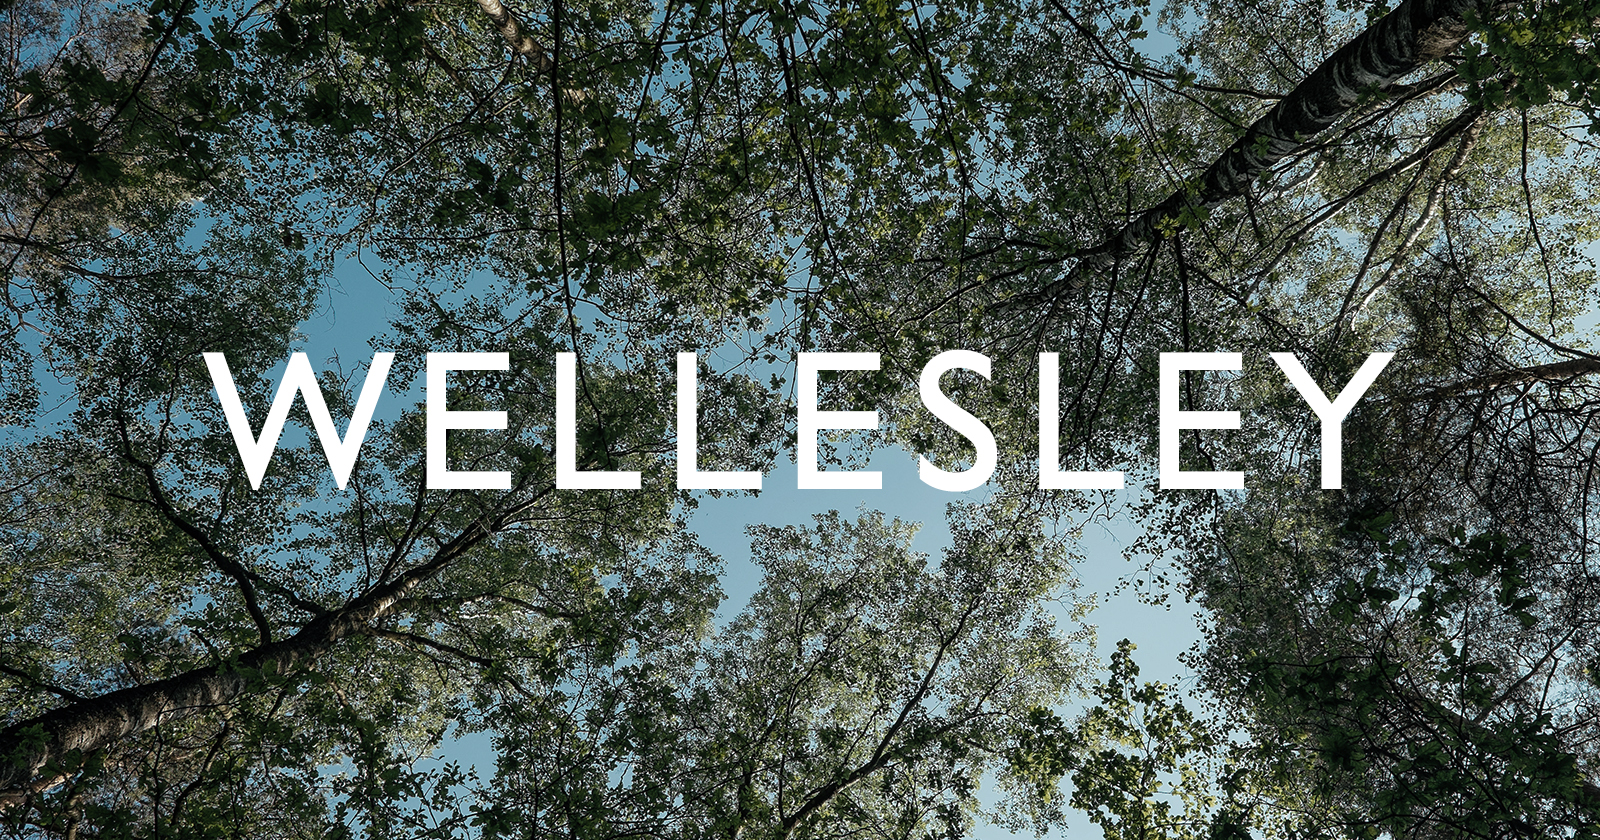 Guide to Wellesley: B/SPOKE Edition